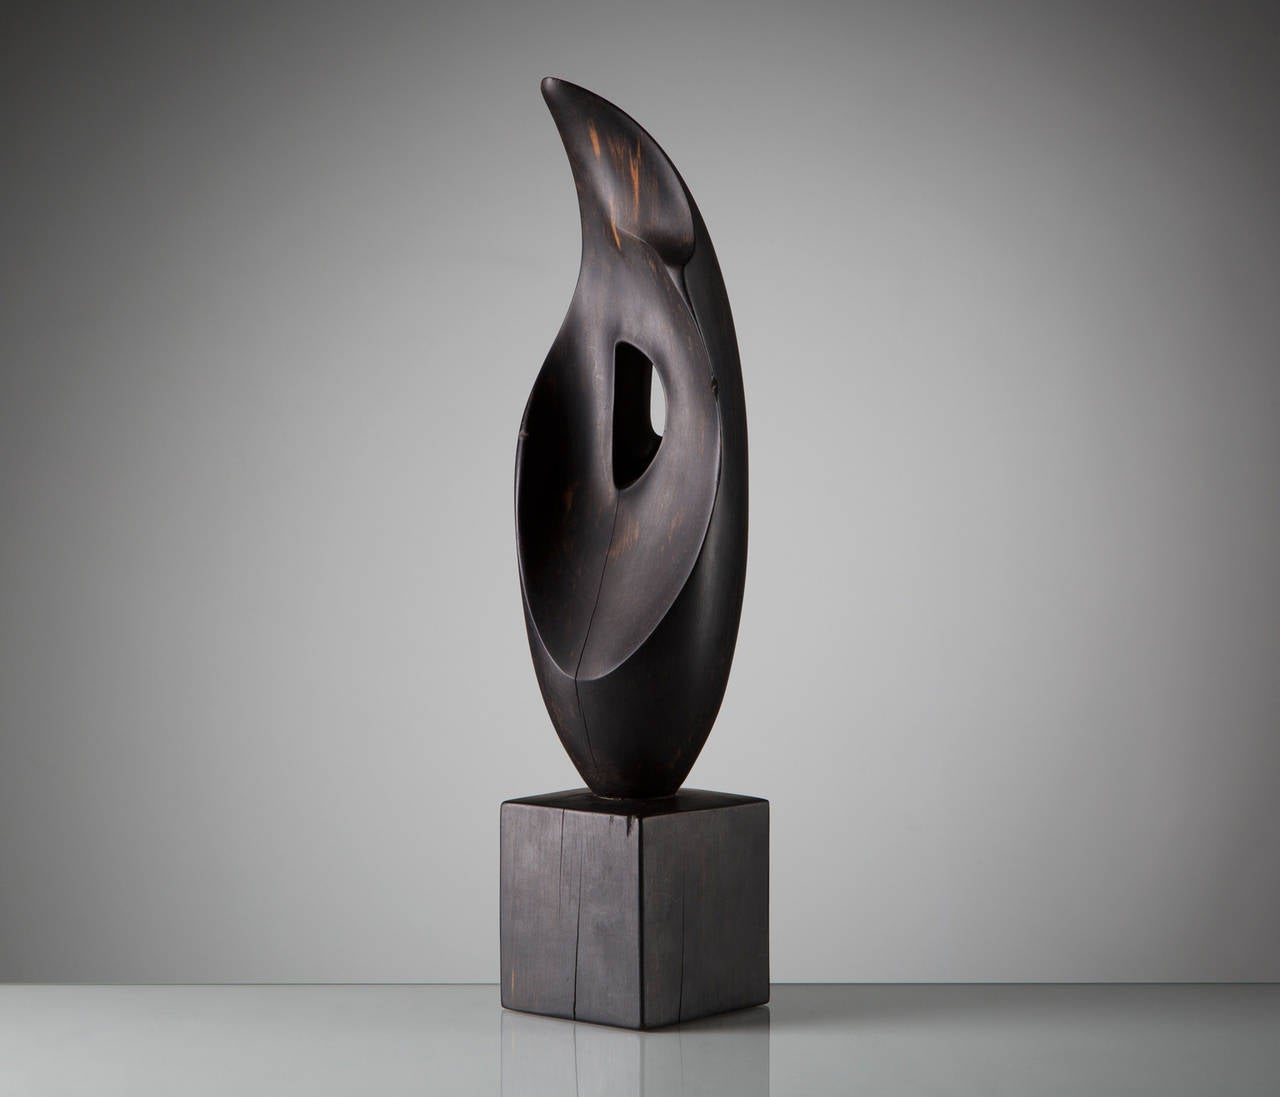 Sculpture, in ebony, by Alexandre Noll, France 1950s. 

Unusual sculpture by Alexandre Noll, signed, made from ebony wood in the 1950s. Alexandre Noll was a French artist (1890–1970) who began sculpting in the 1950s. He exhibited in 1964 at the